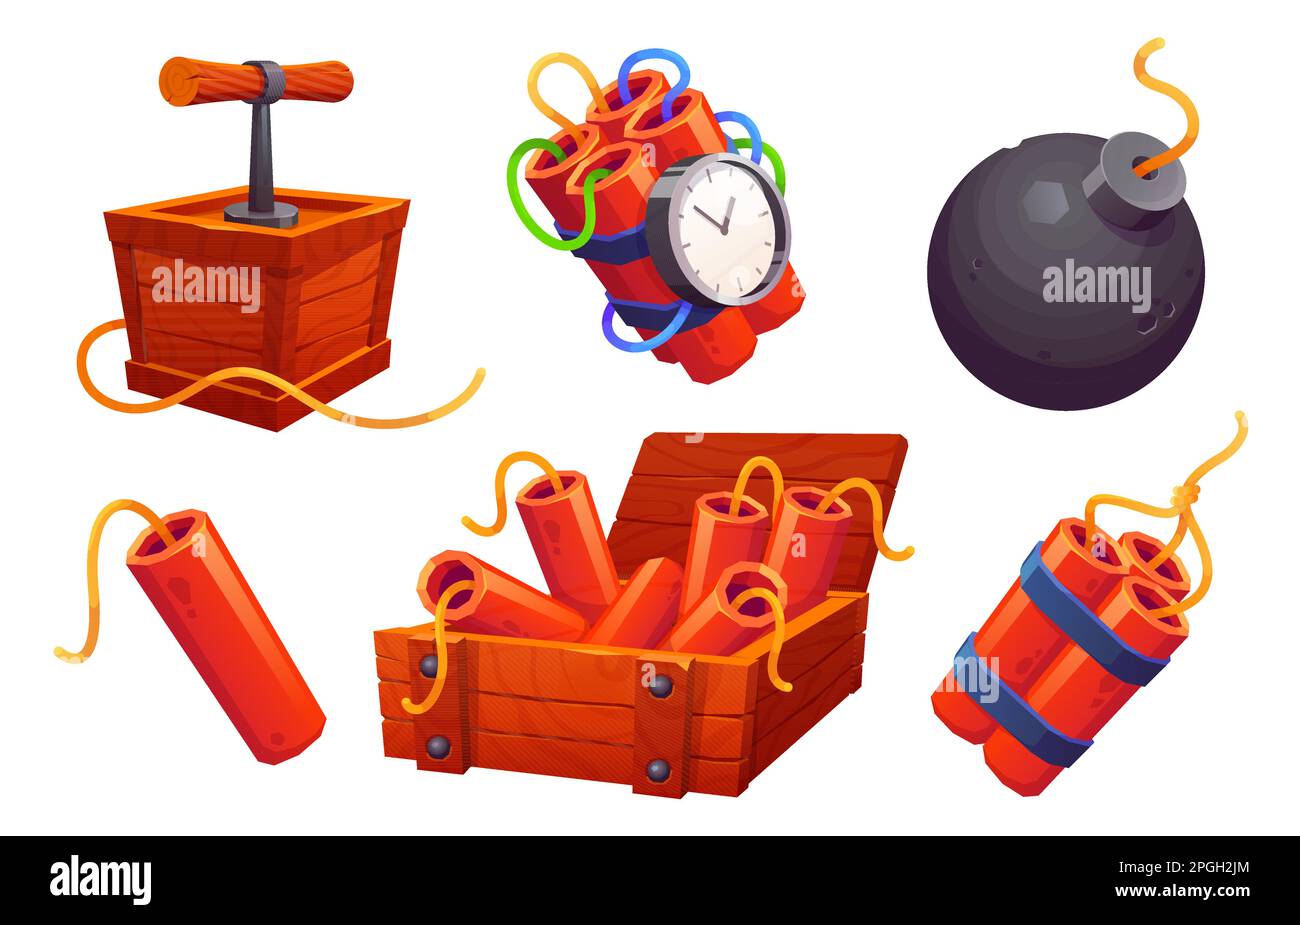 Cartoon set of tnt explosives isolated on white background. Vector illustration of old bomb detonator, fuse, vintage wooden box with dynamite sticks, explosion timer mechanism with clock. Game assets Stock Vector